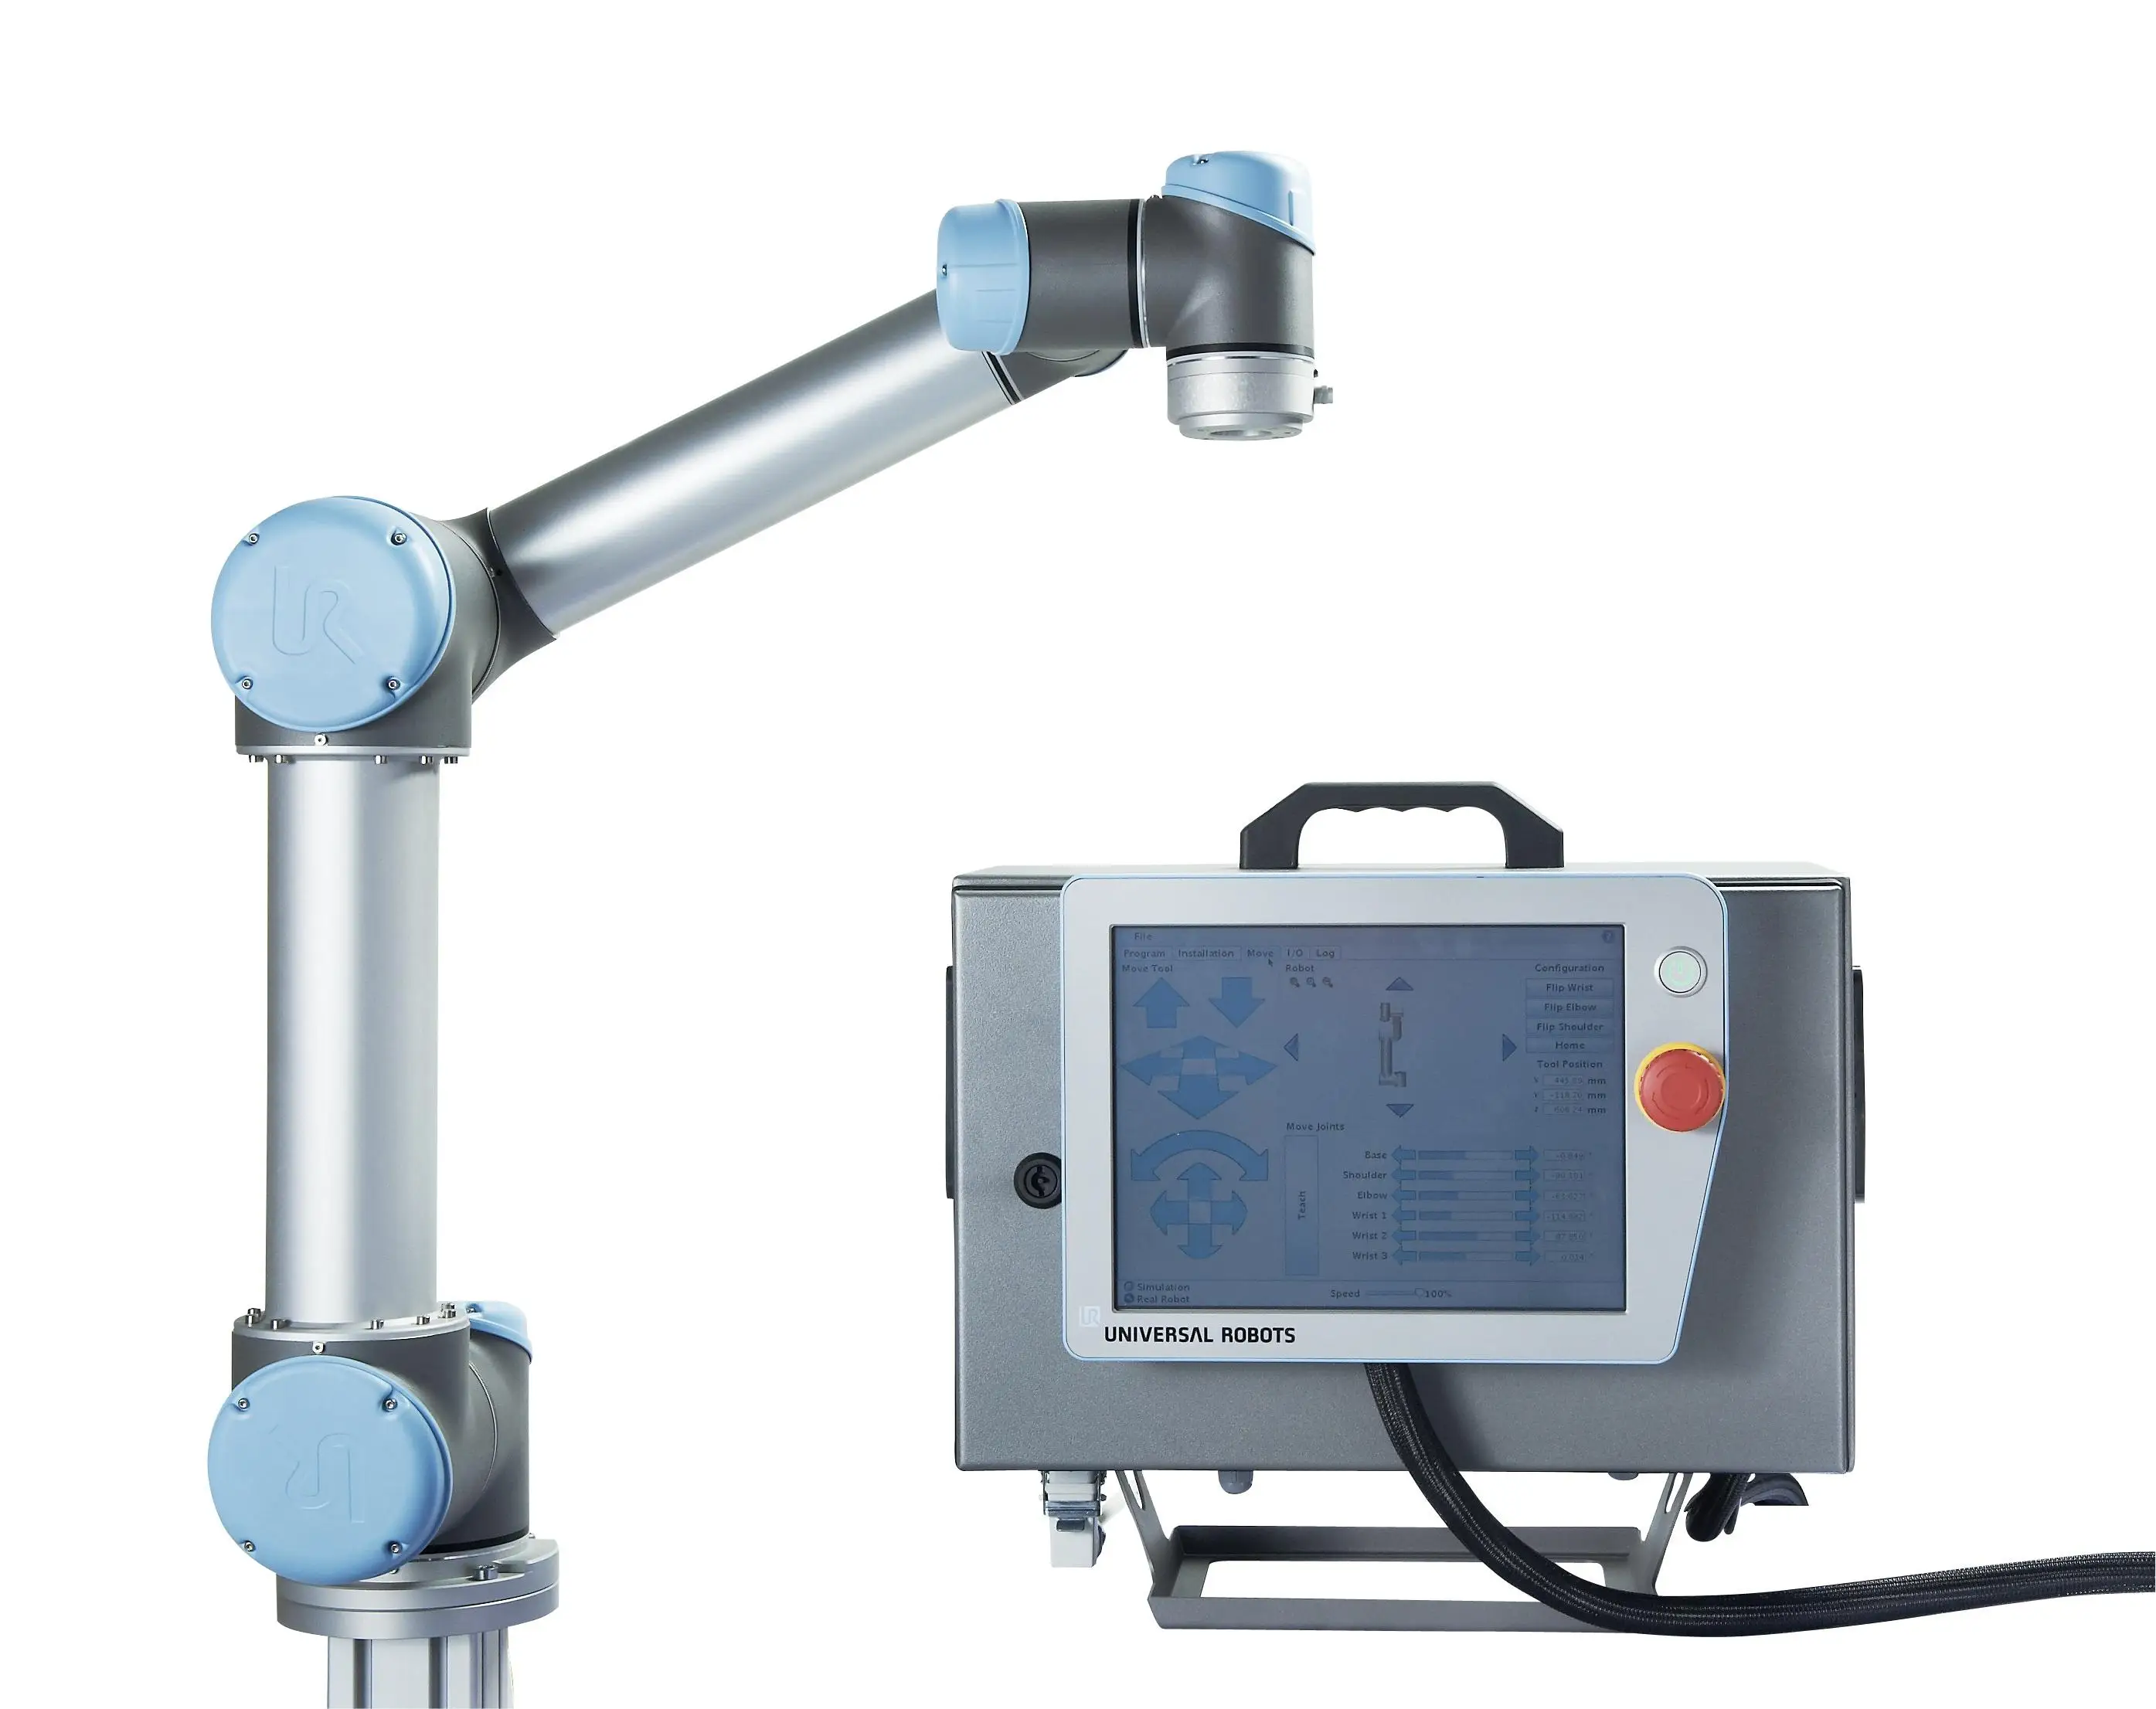 Universal UR5 UR5e robot arm price and station robot of and place robot machine, View pick and place machine, UR Product Details from Xiangjing (shanghai) Mechanical And Electrical